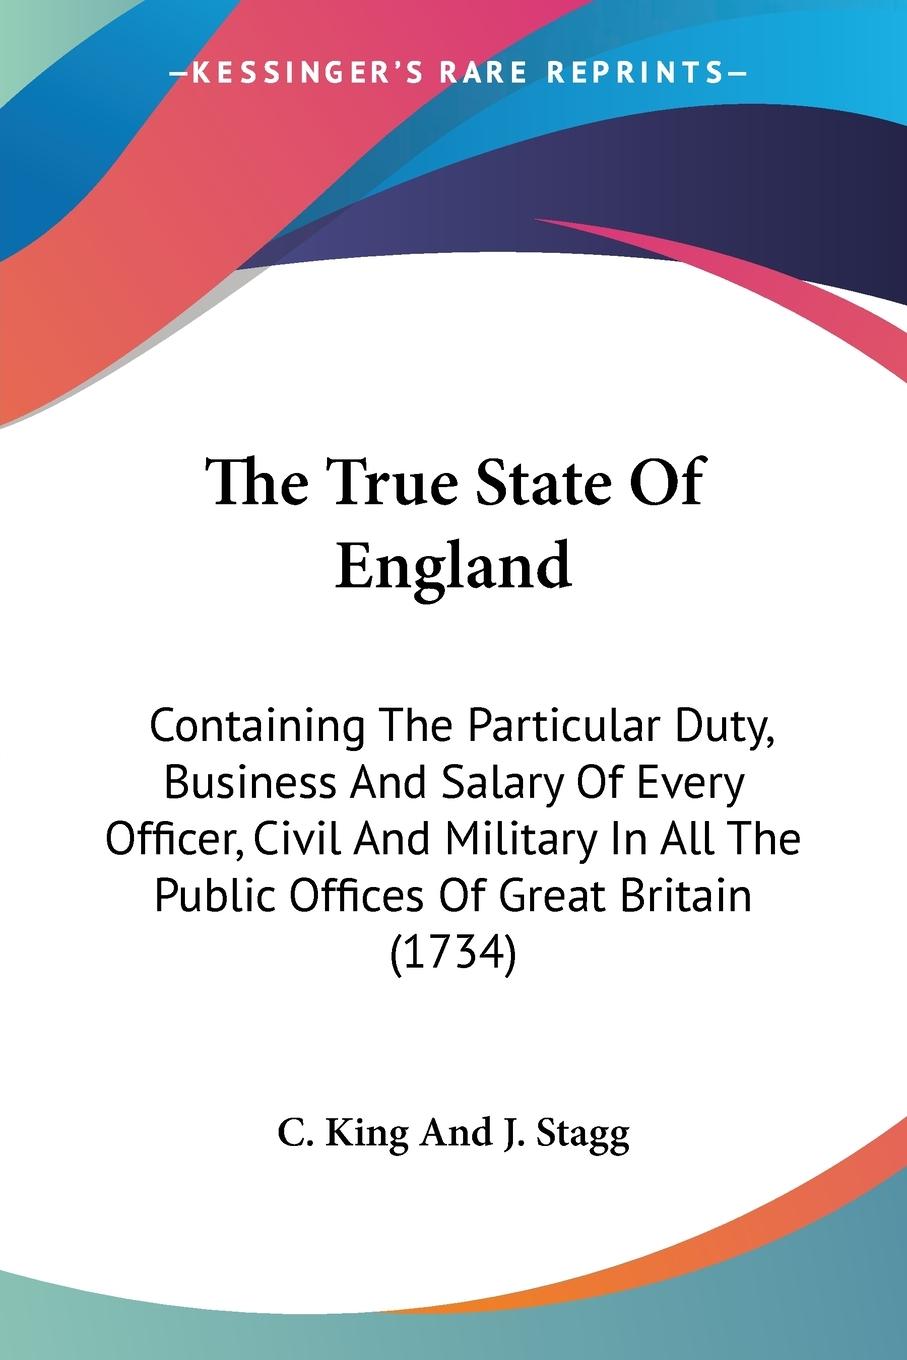 The True State Of England - C. King And J. Stagg